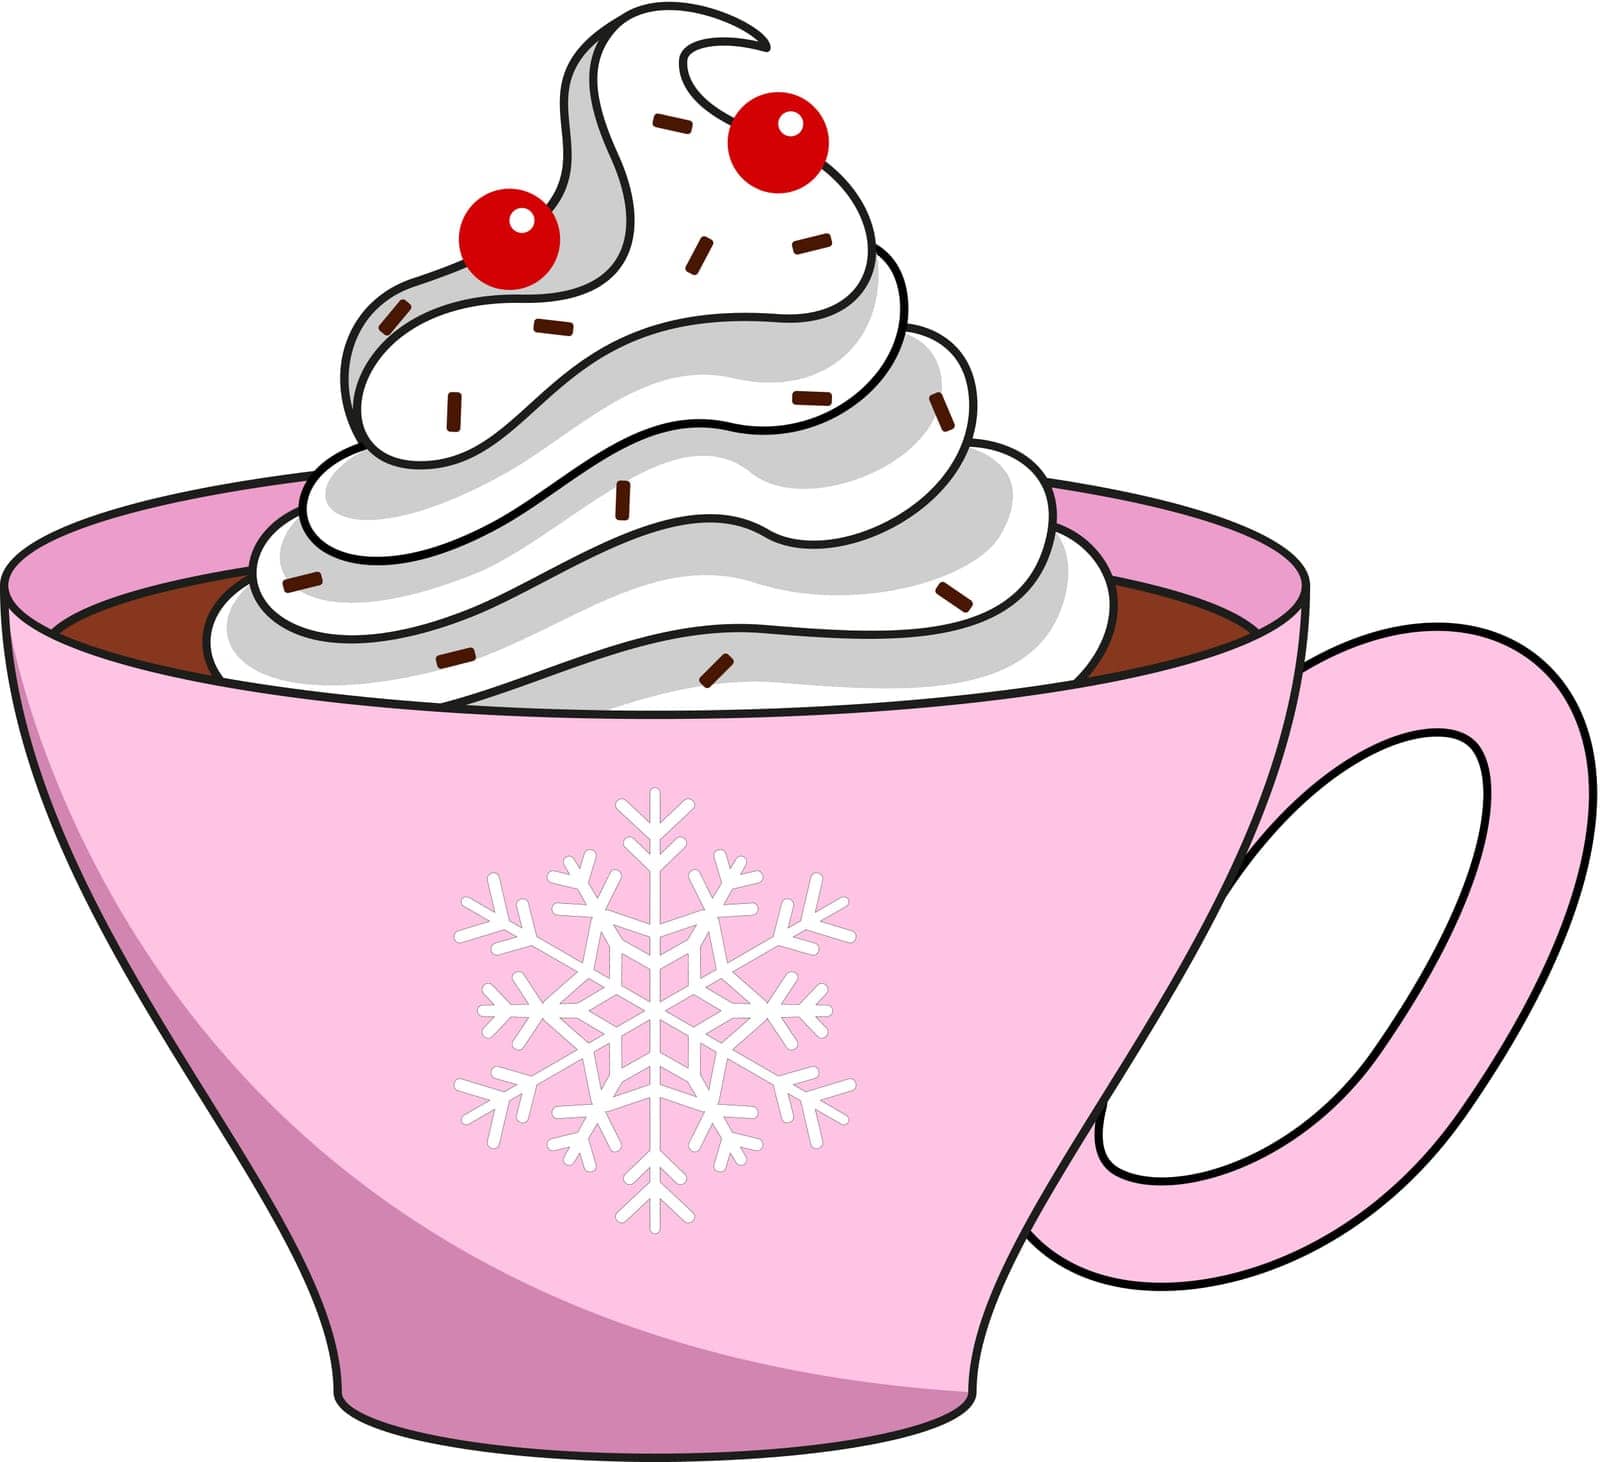 Hot chocolate in a pink mug with whipped cream, decorated with chocolate sprinkles. Christmas drink vector illustration.